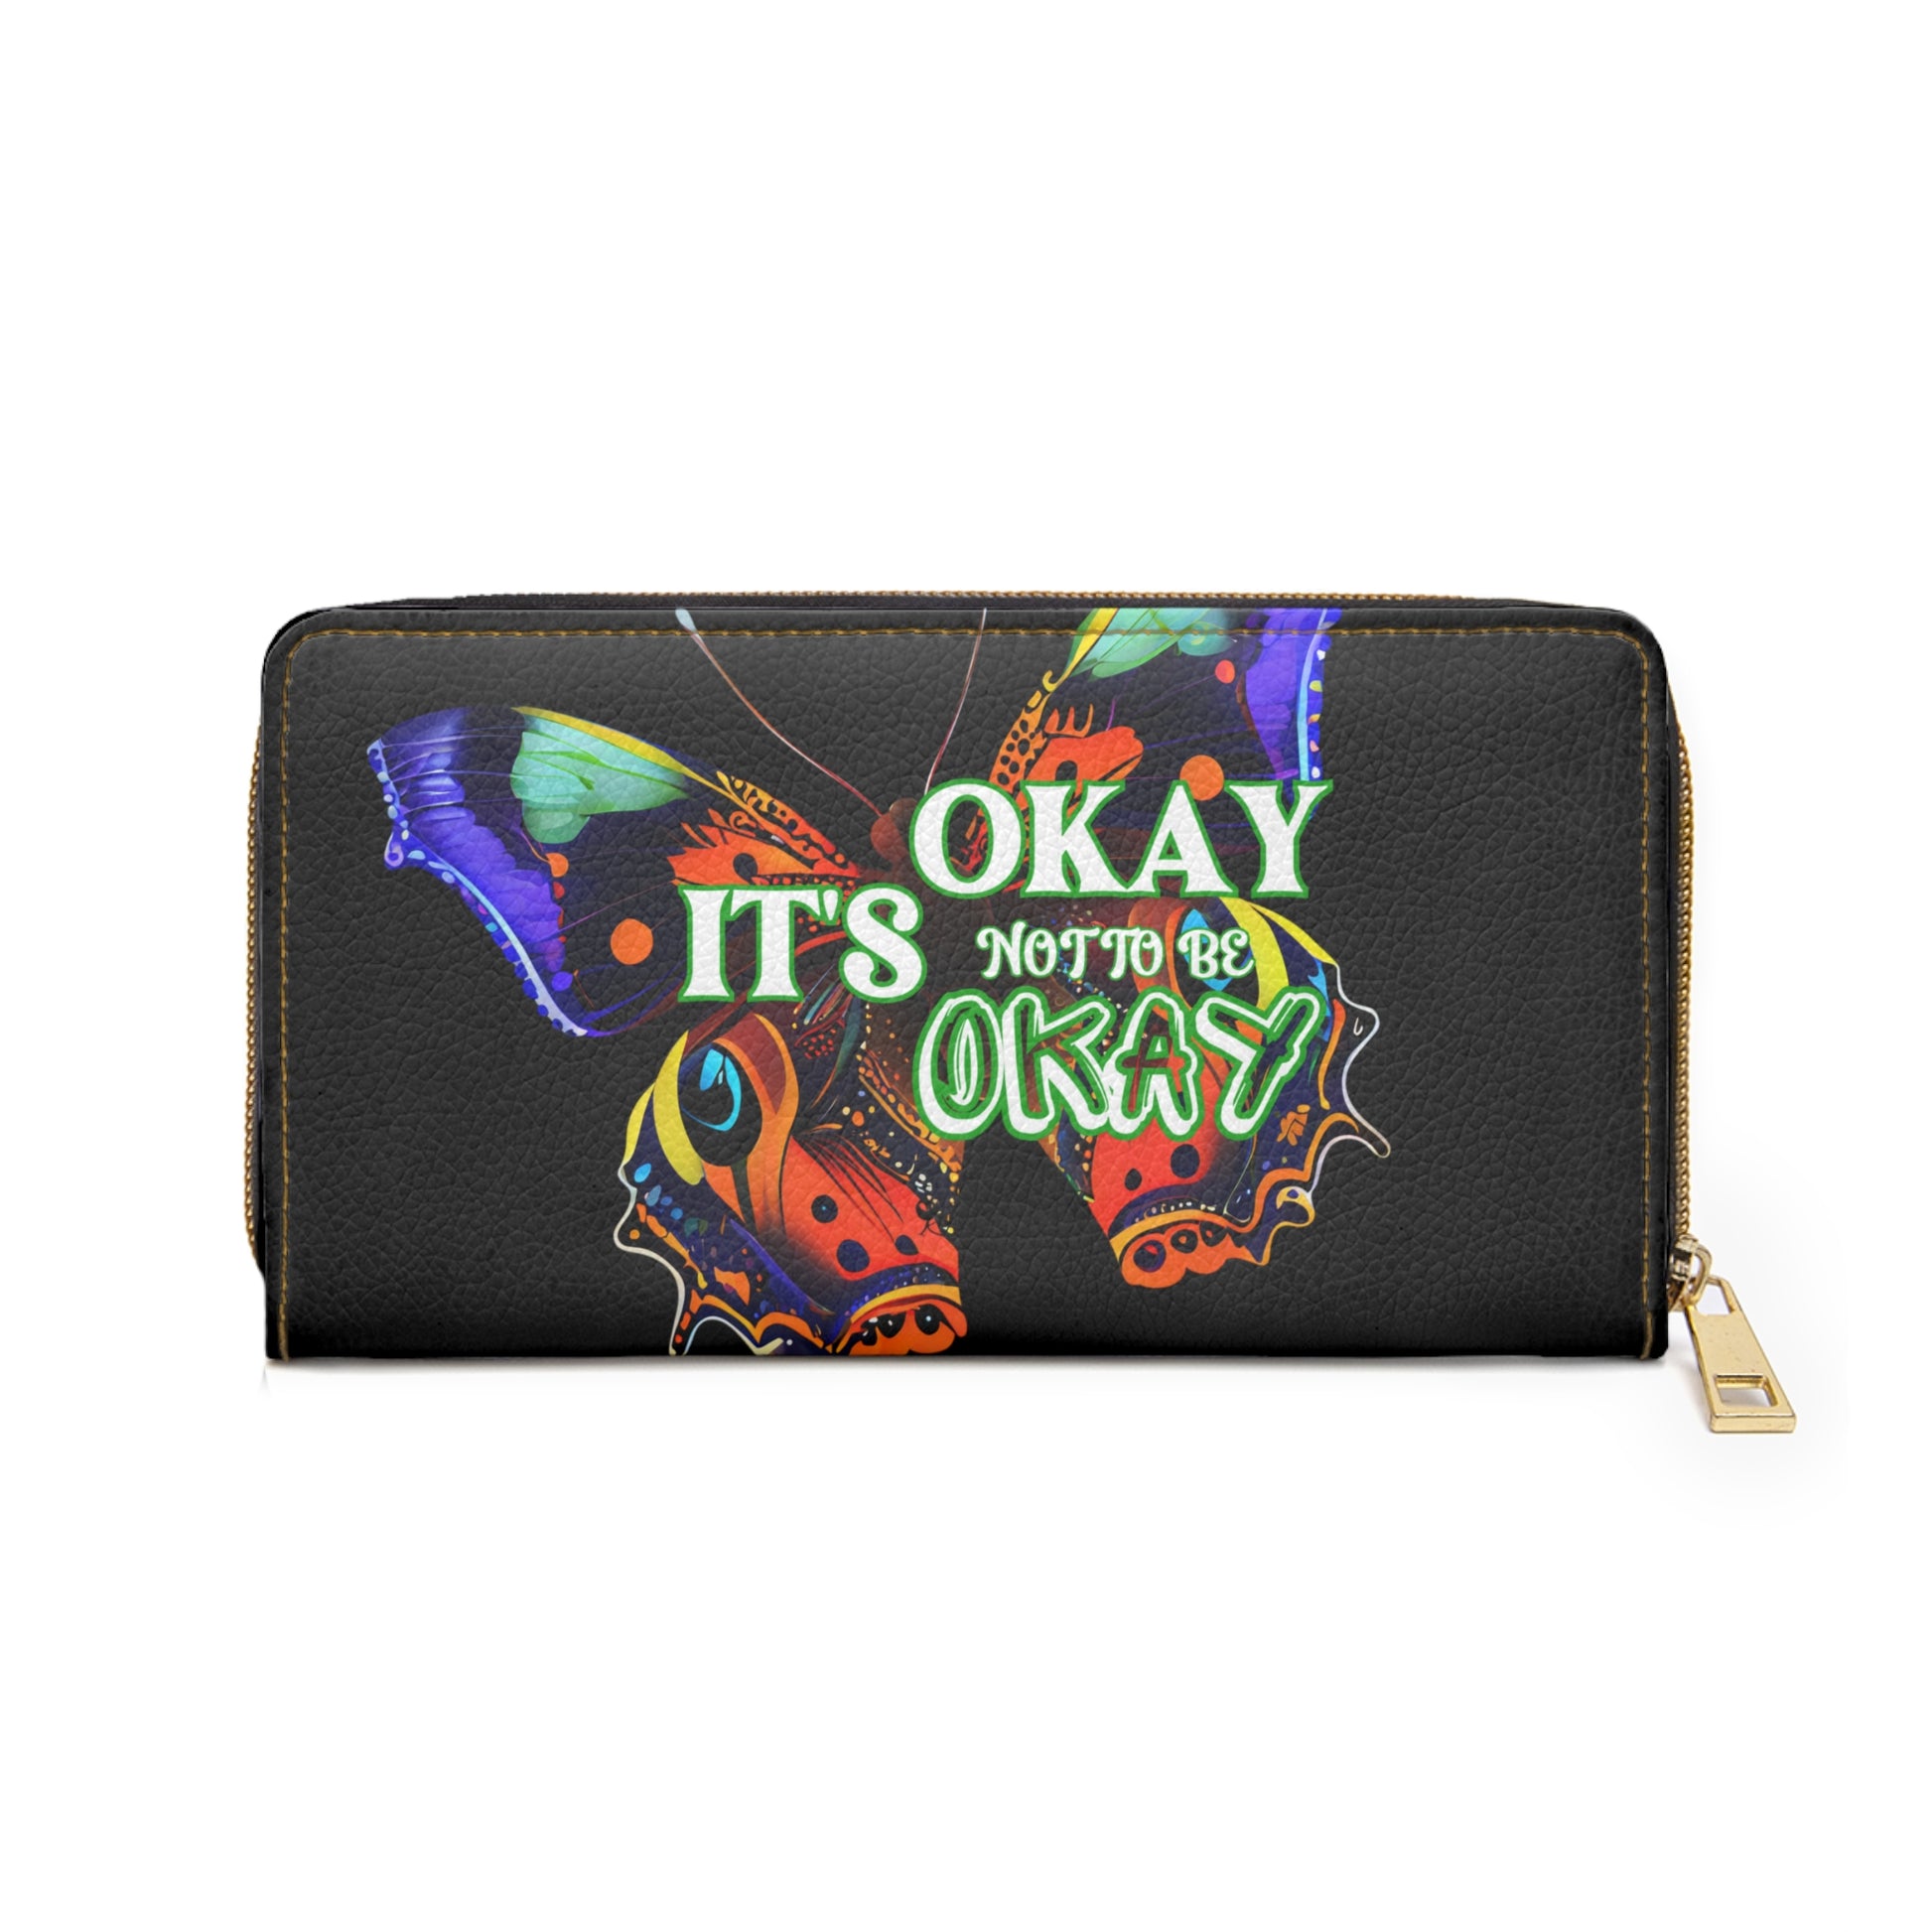 IT’S OKAY, NOT TO BE OKAY- Positive Afrocentric Affirmation Vegan Leather Wallet Bag- Empower Your Style and Self-Love ; Black Butterfly Wallet